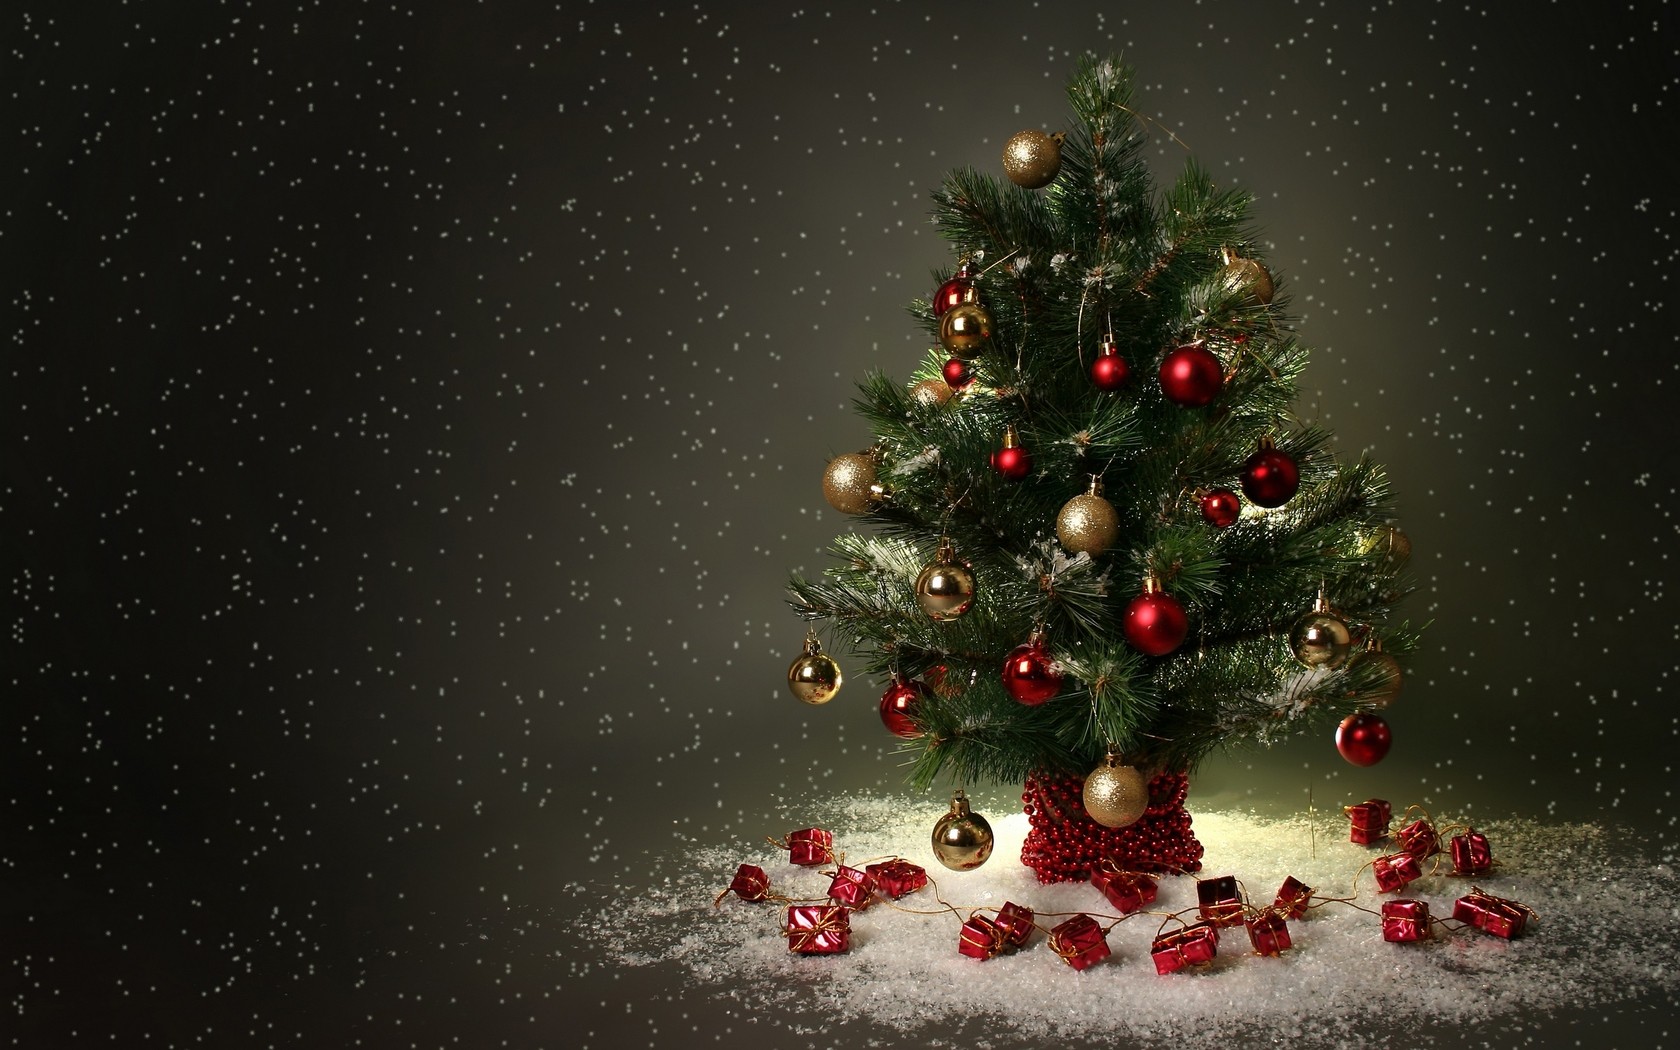 Amazing Christmas Tree Wallpaper Hd | View Wallpapers